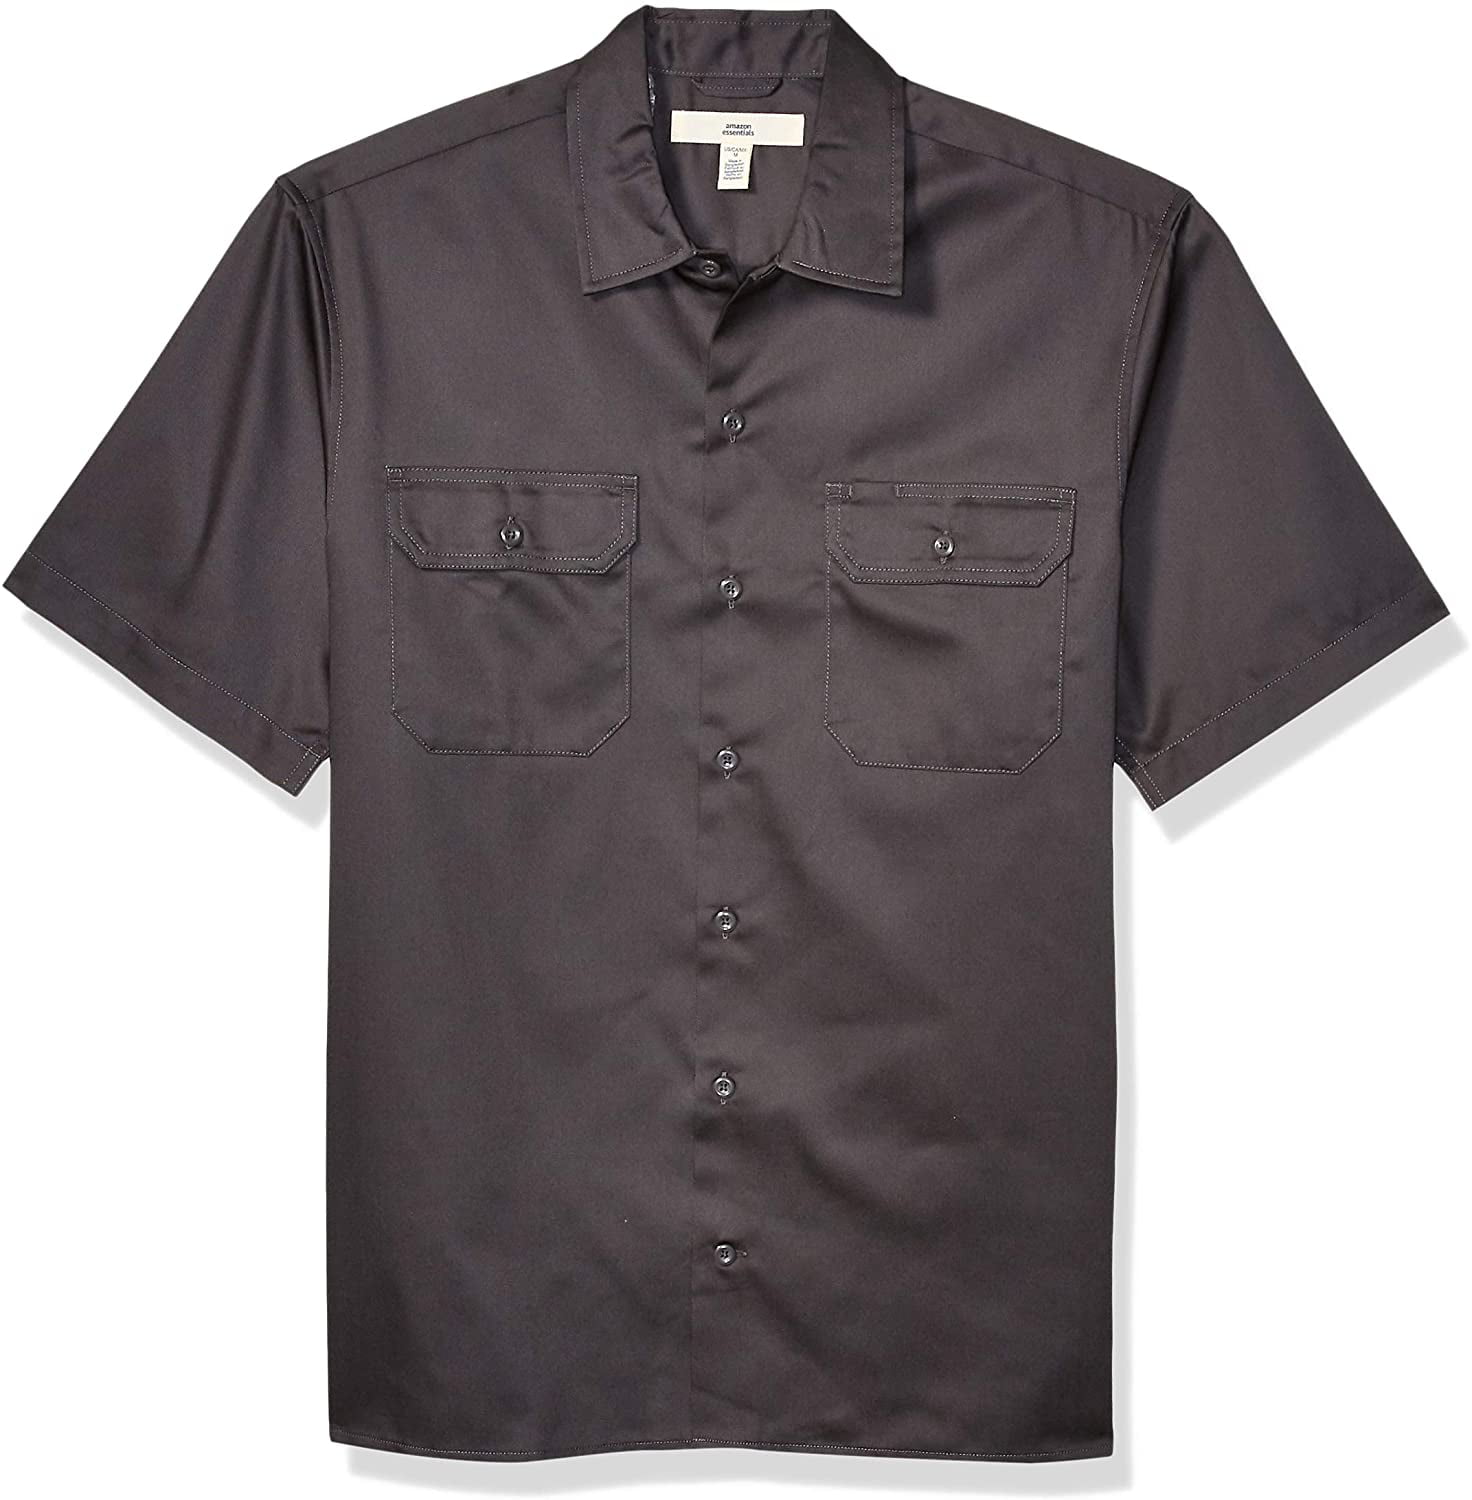 Mens Short-Sleeve Stain and Wrinkle-Resistant Work Shirt | Walmart Canada